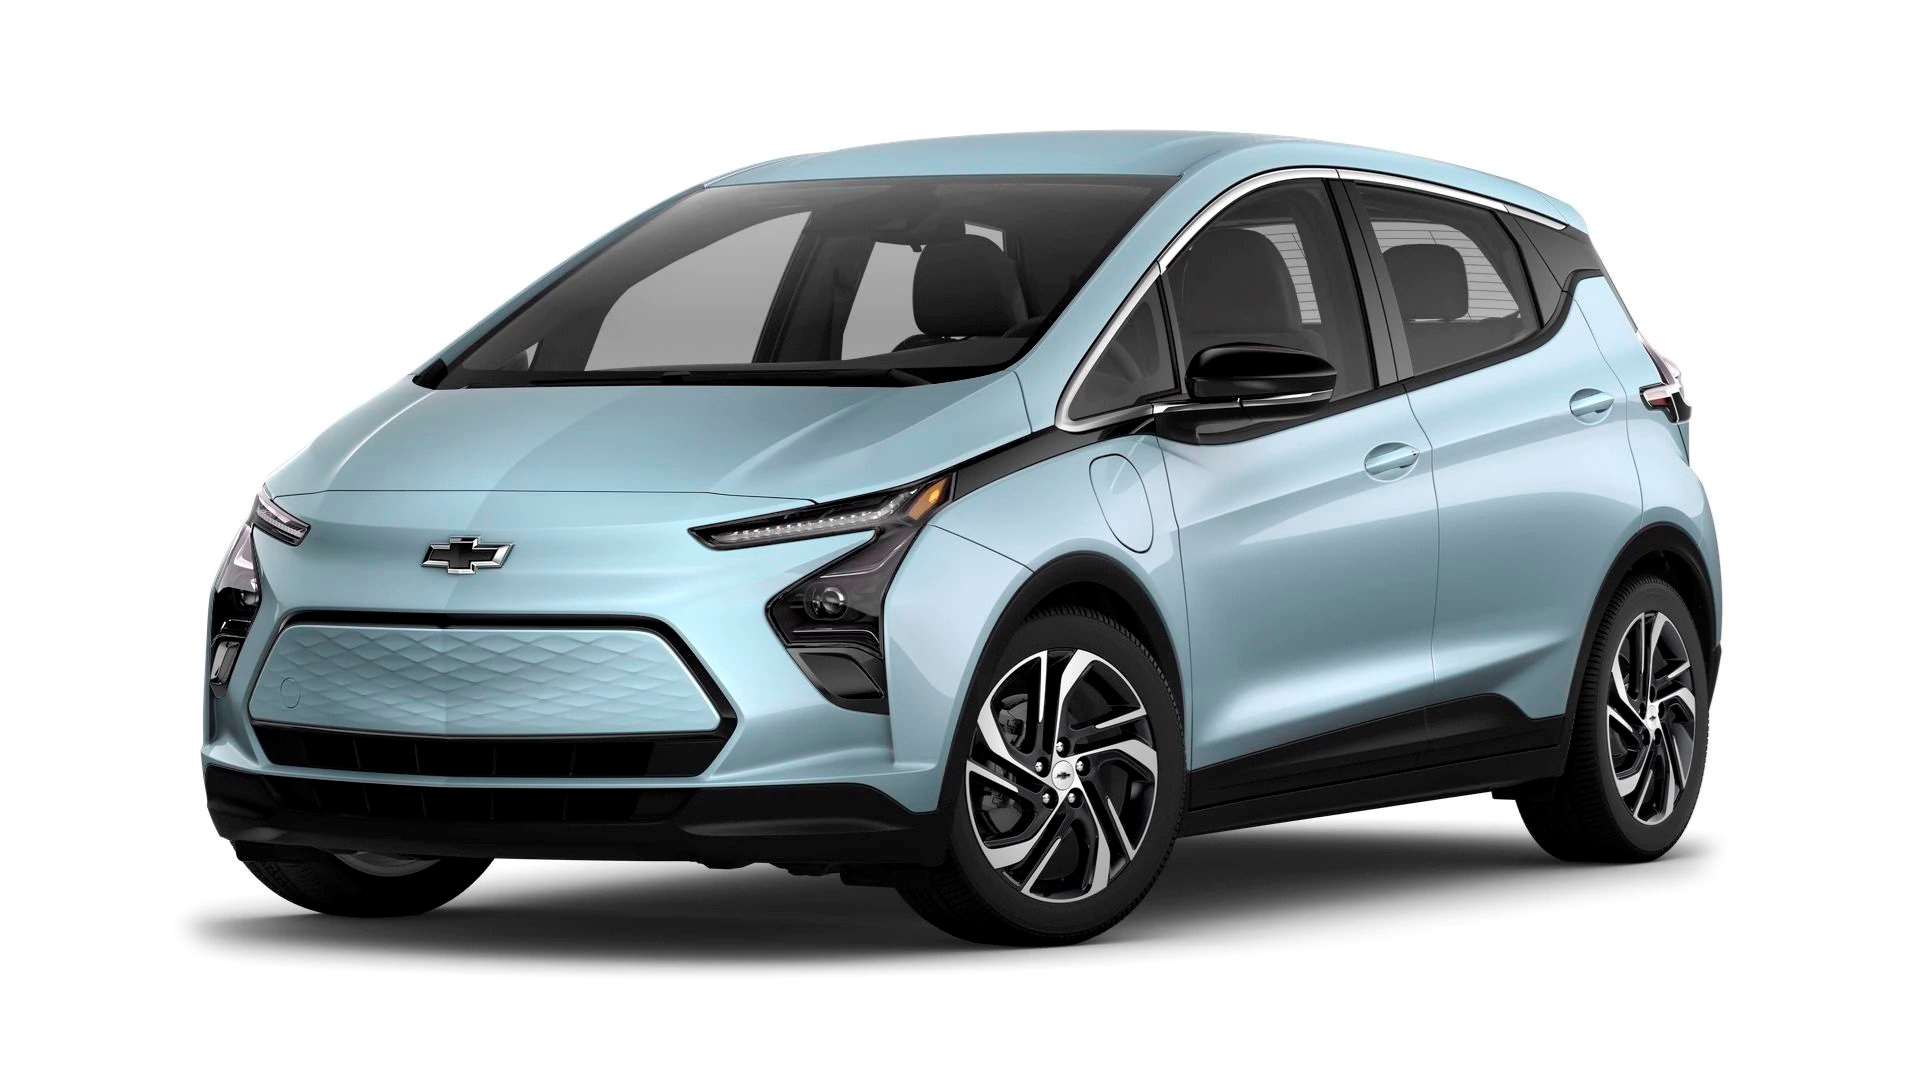 2023 Chevrolet Bolt EV 1LT Full Specs, Features and Price | CarBuzz